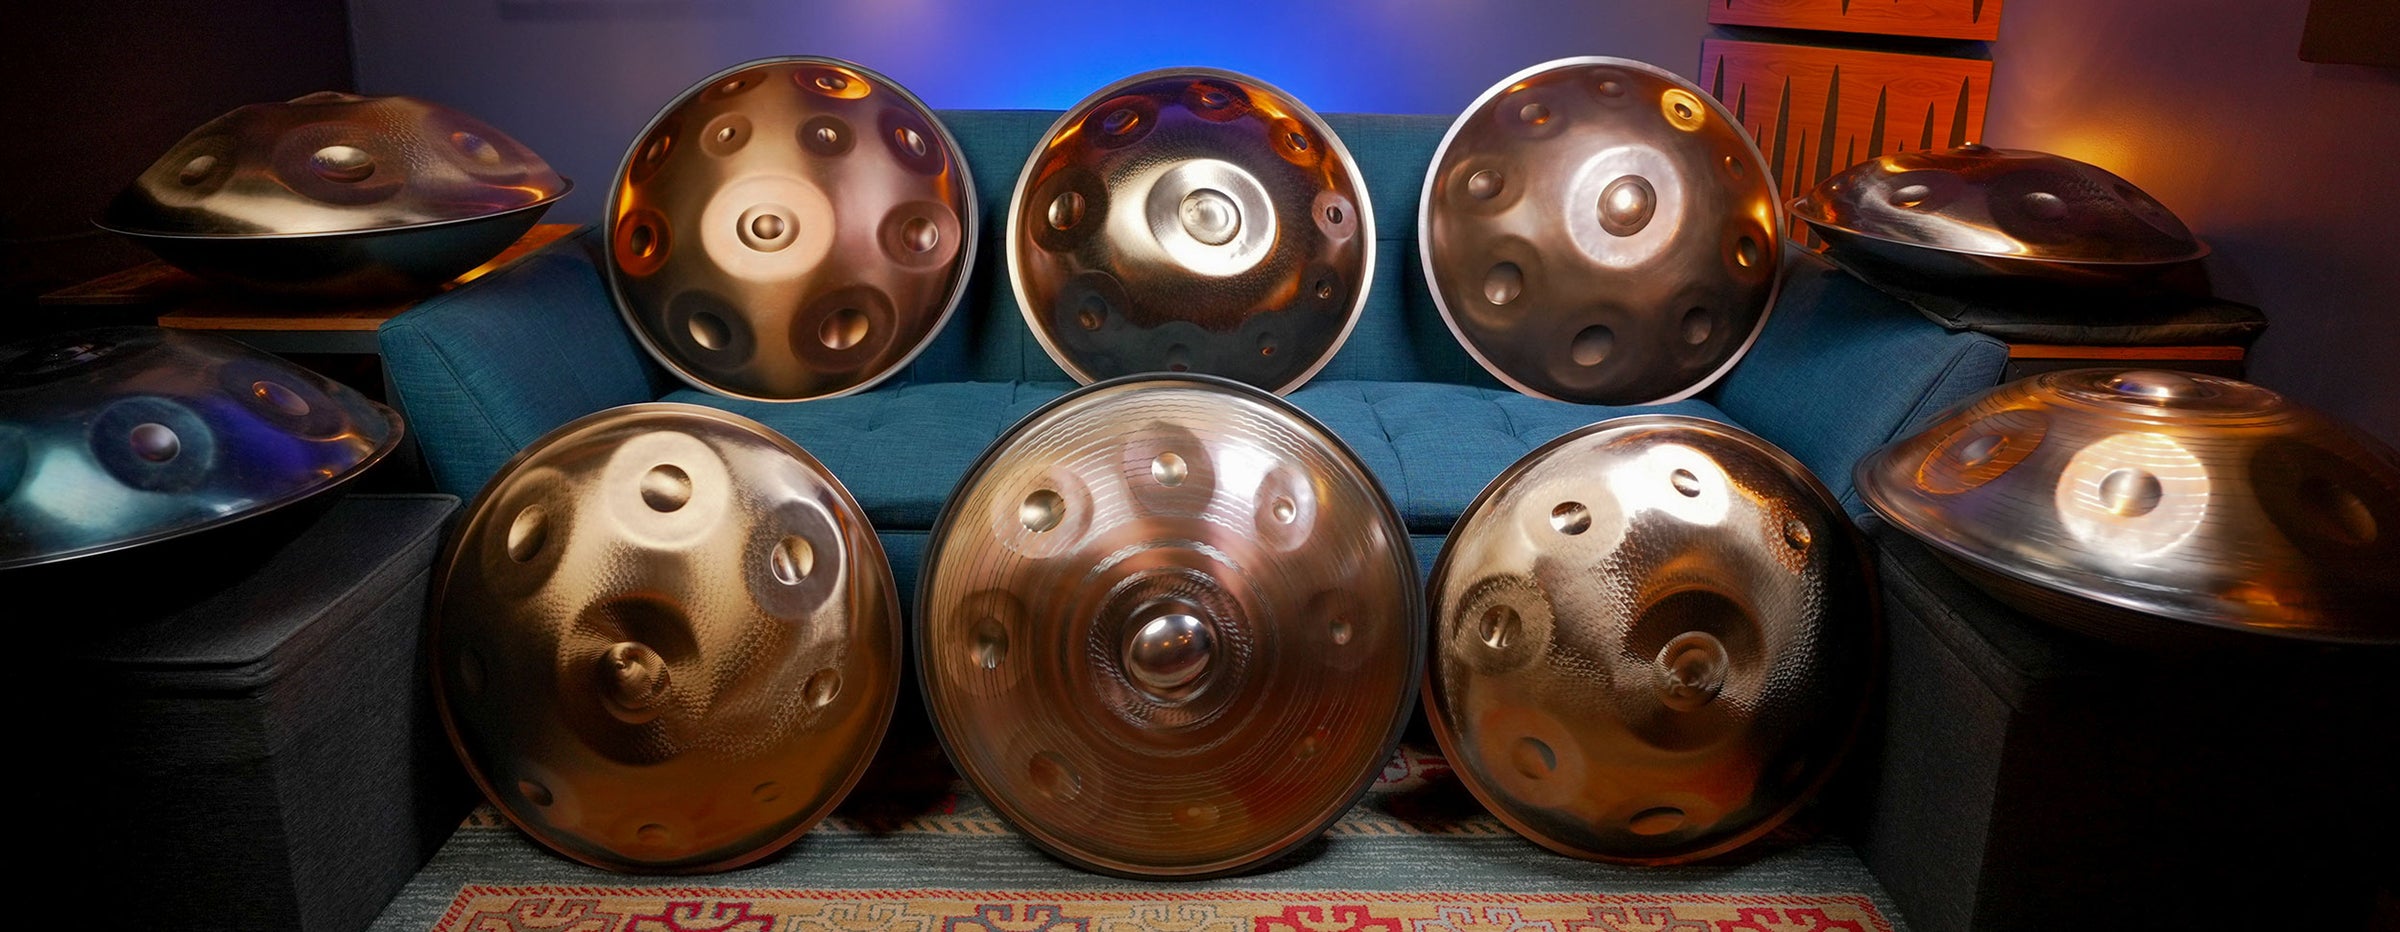 Learning the Handpan: Lesson 1 / Simplified Handpan Notation by